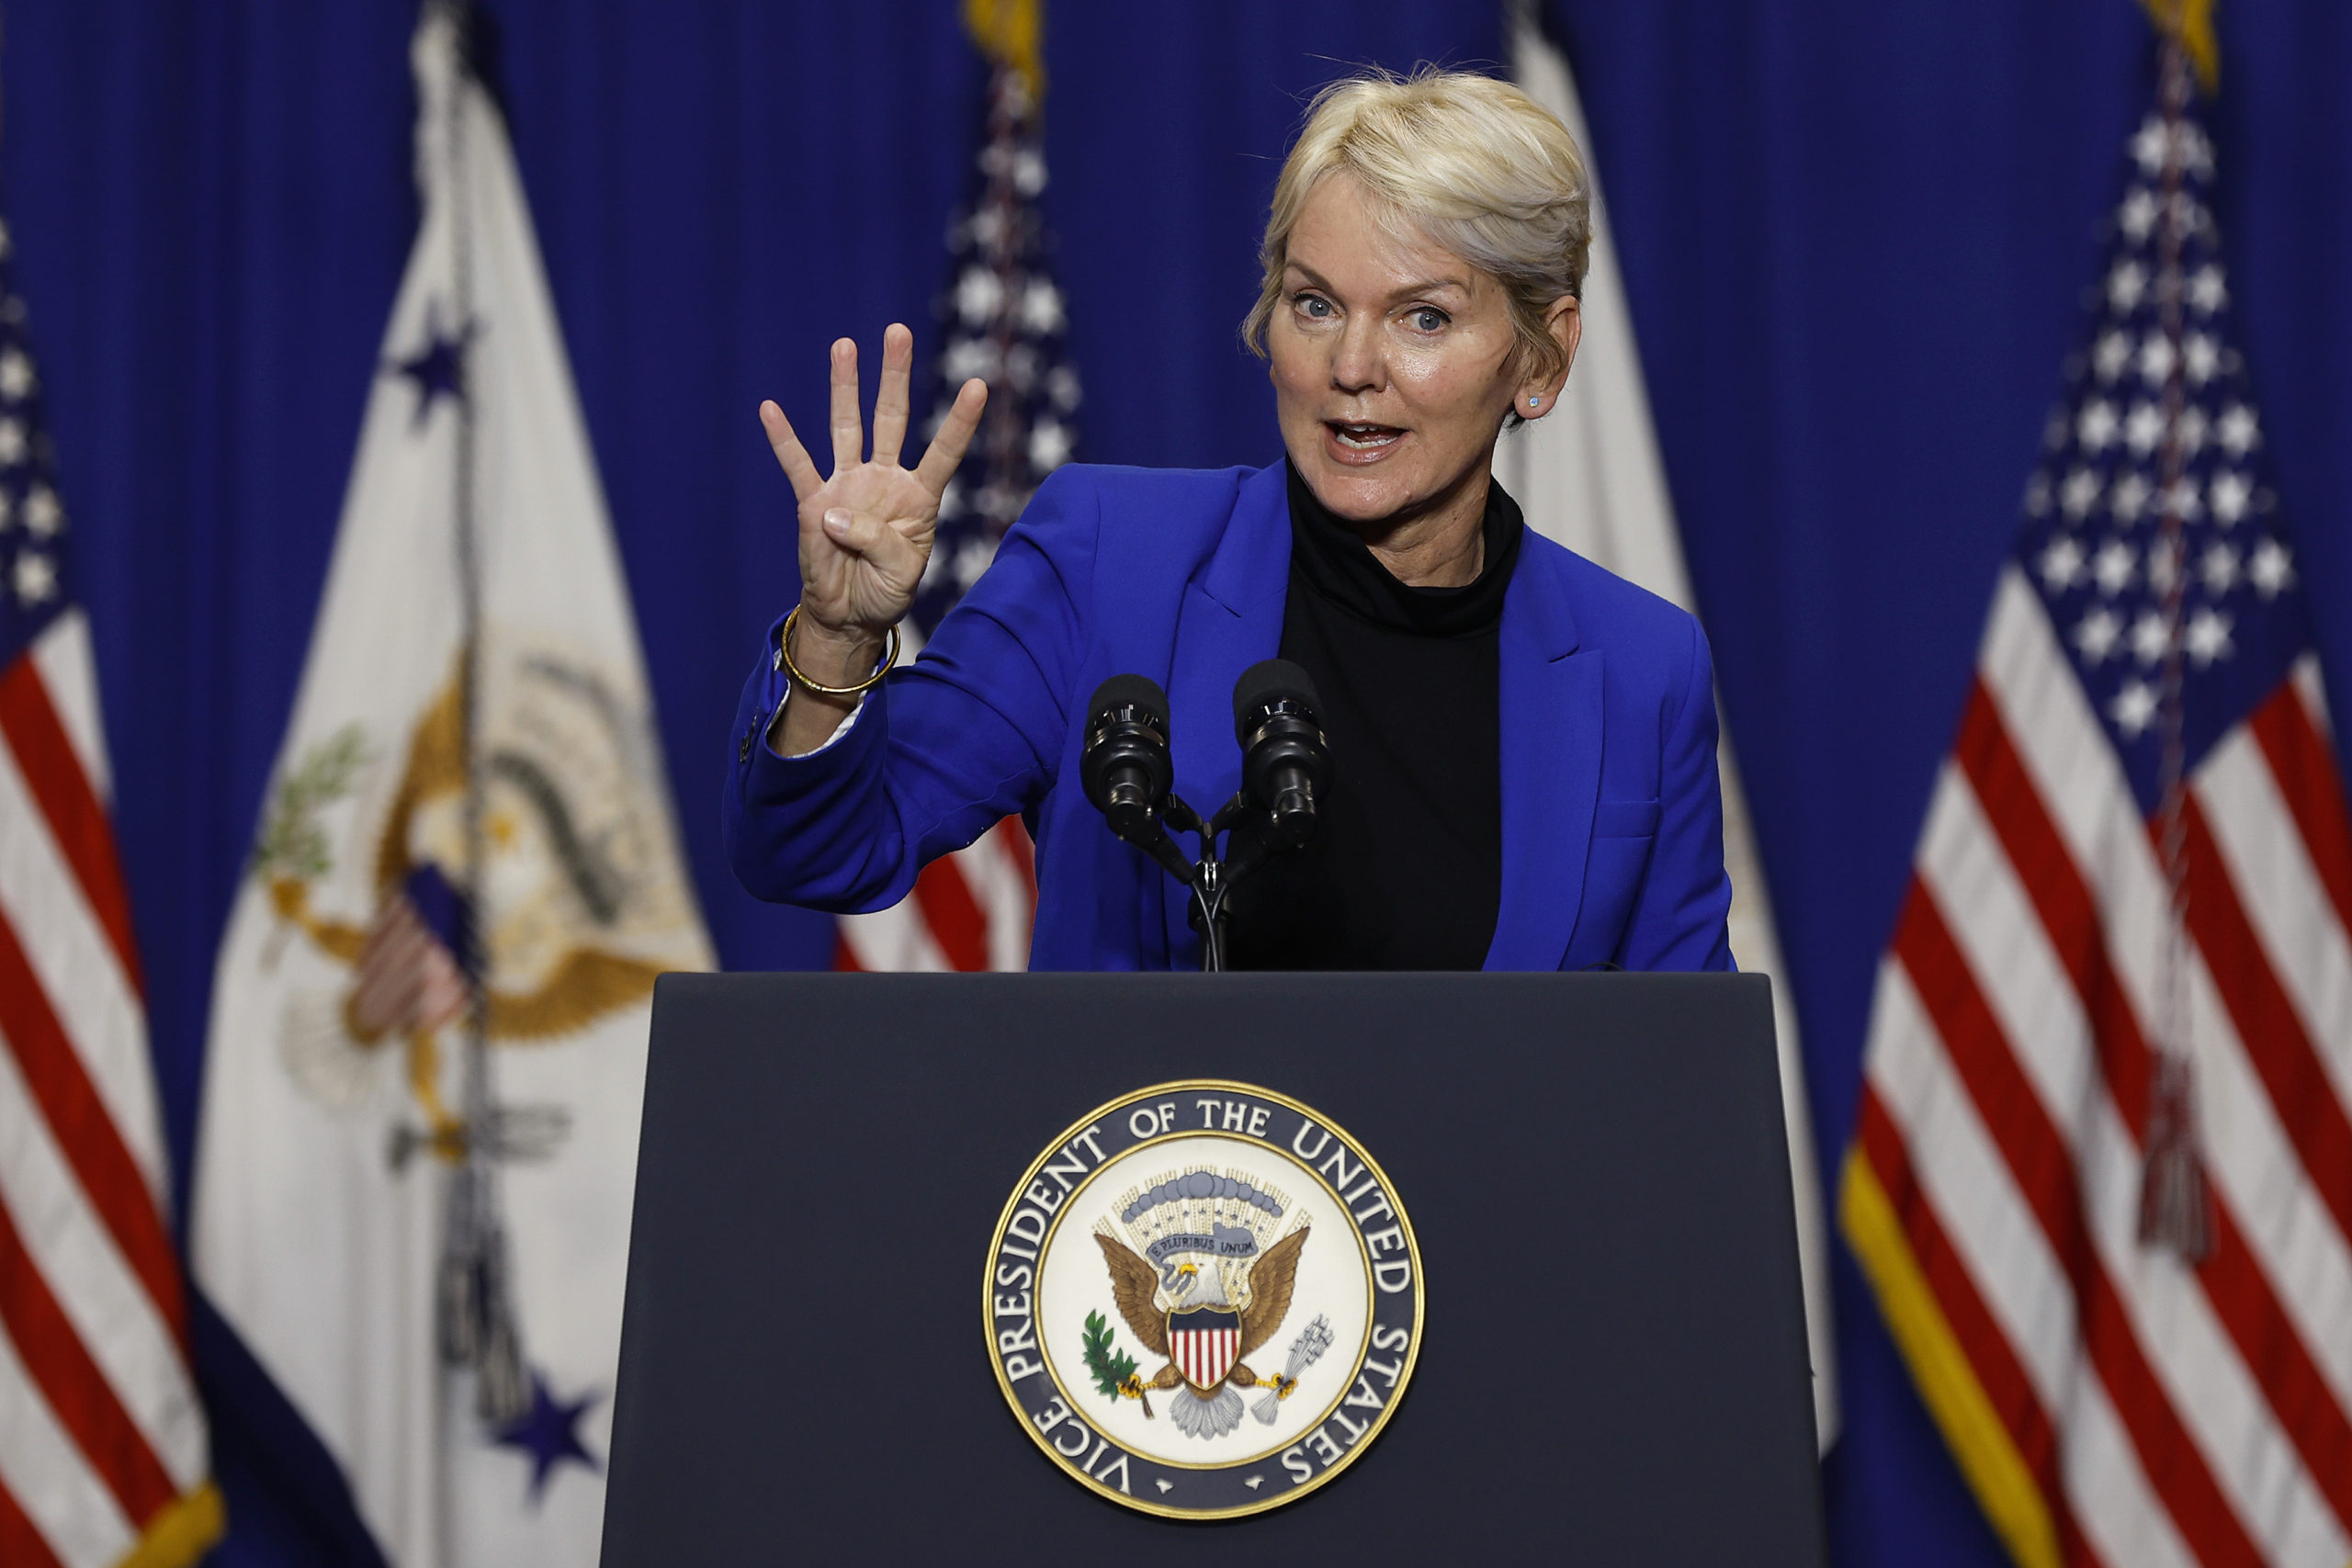 Energy Secretary Jennifer Granholm delivers remarks during an event at the Prince George’s County Brandywine Maintenance Facility on Dec. 13 in Brandywine, Maryland. (Chip Somodevilla/Getty Images)